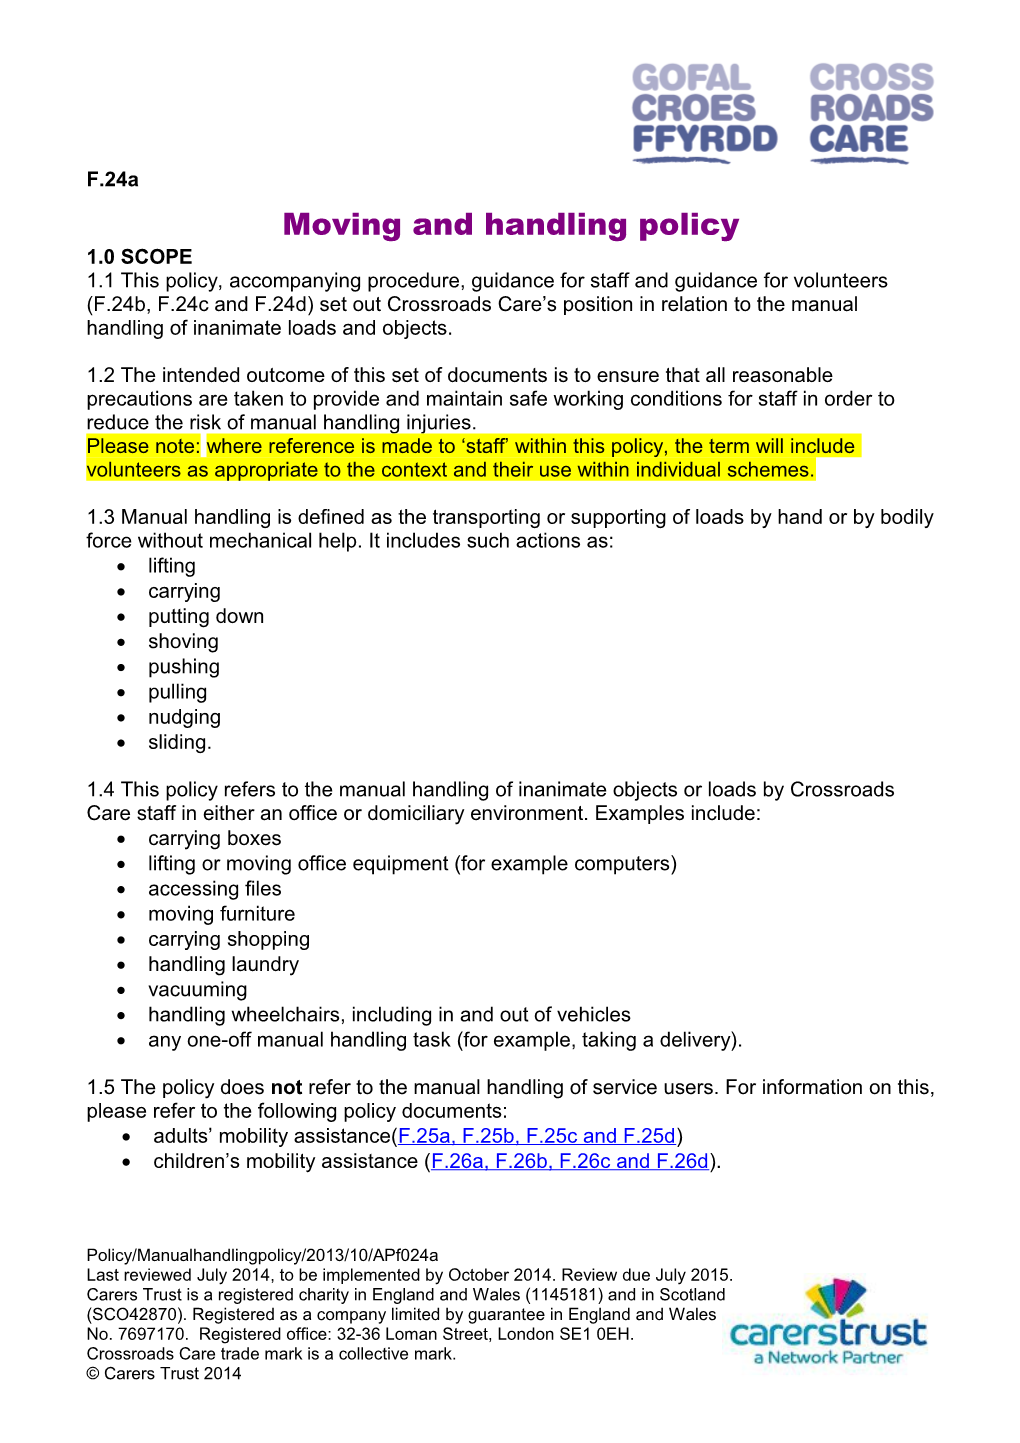 Moving and Handling Policy